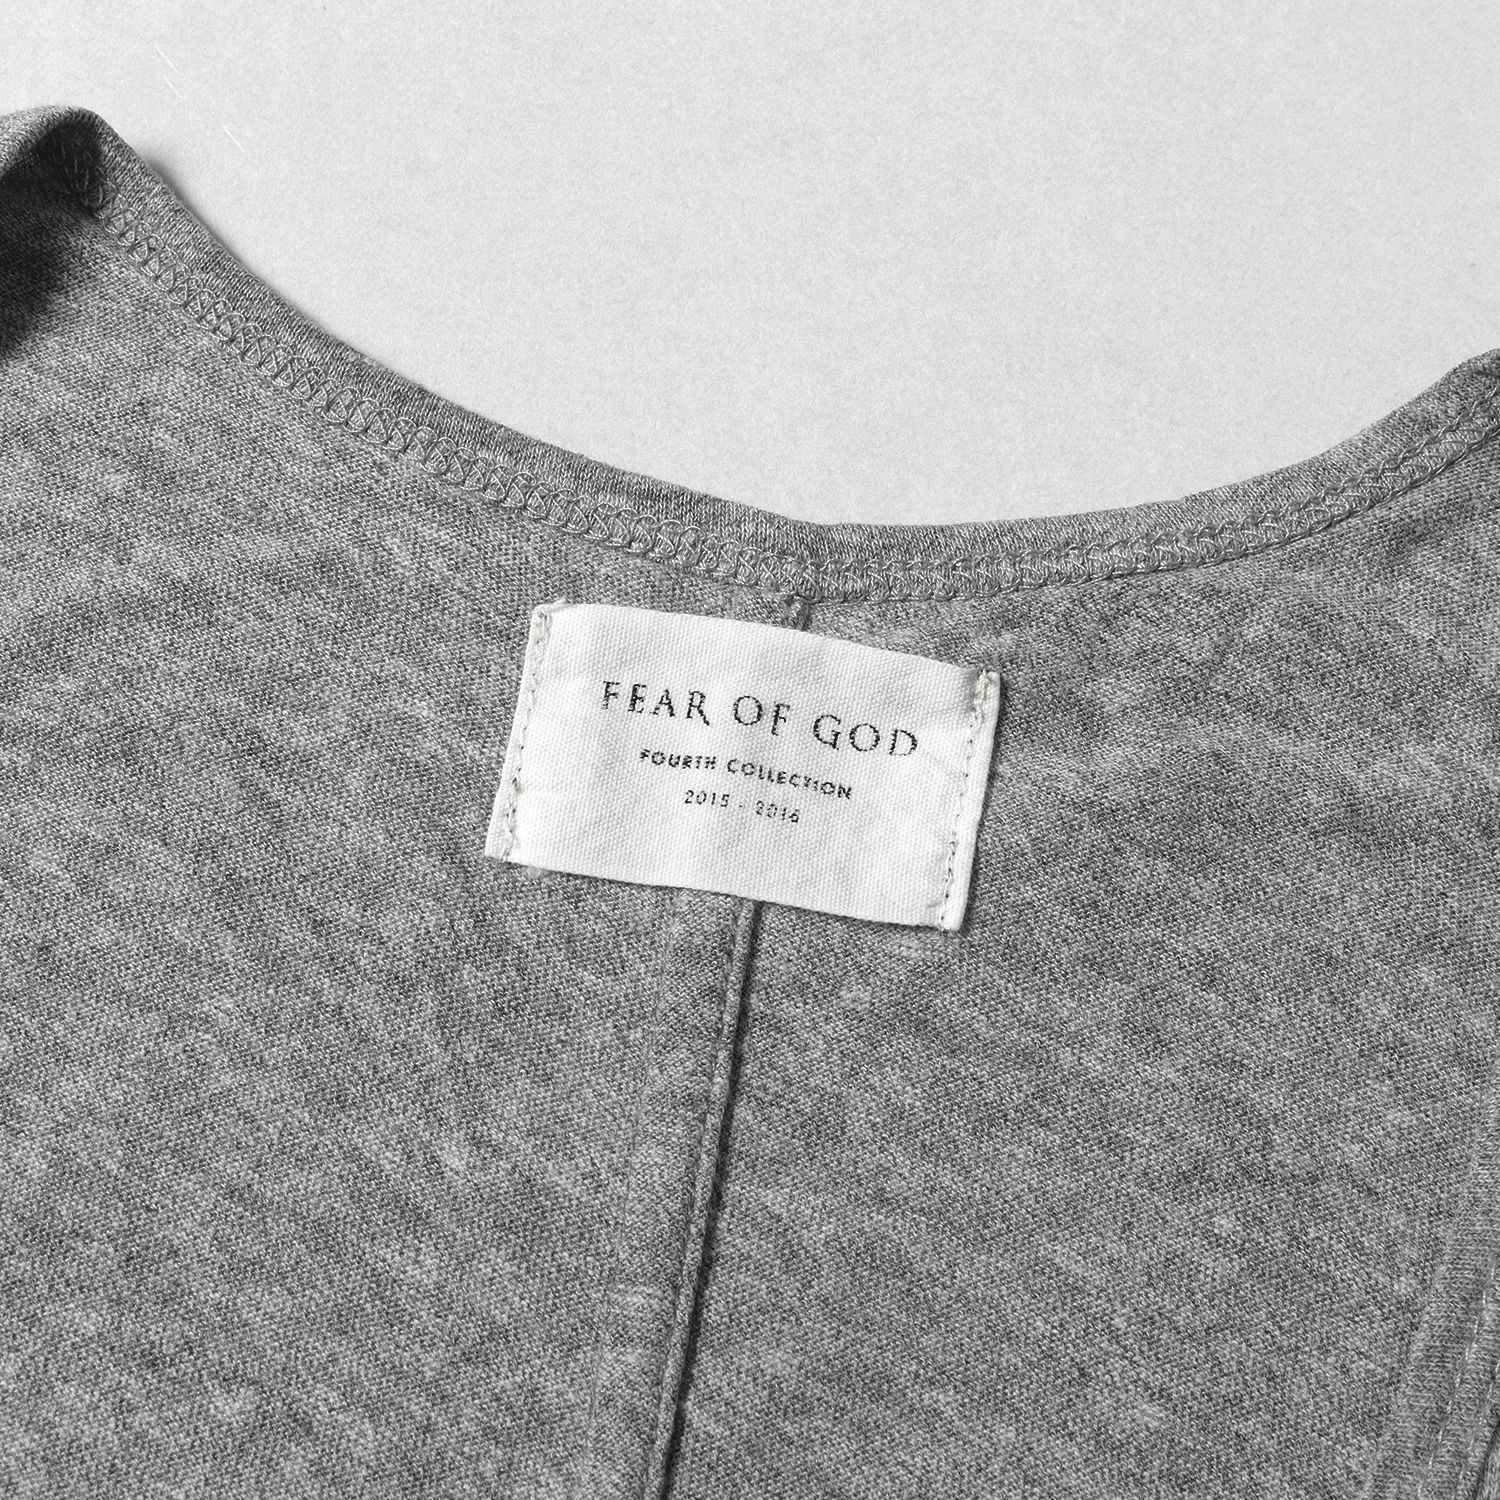 fear of god third collectionレイヤードタンクトップ-